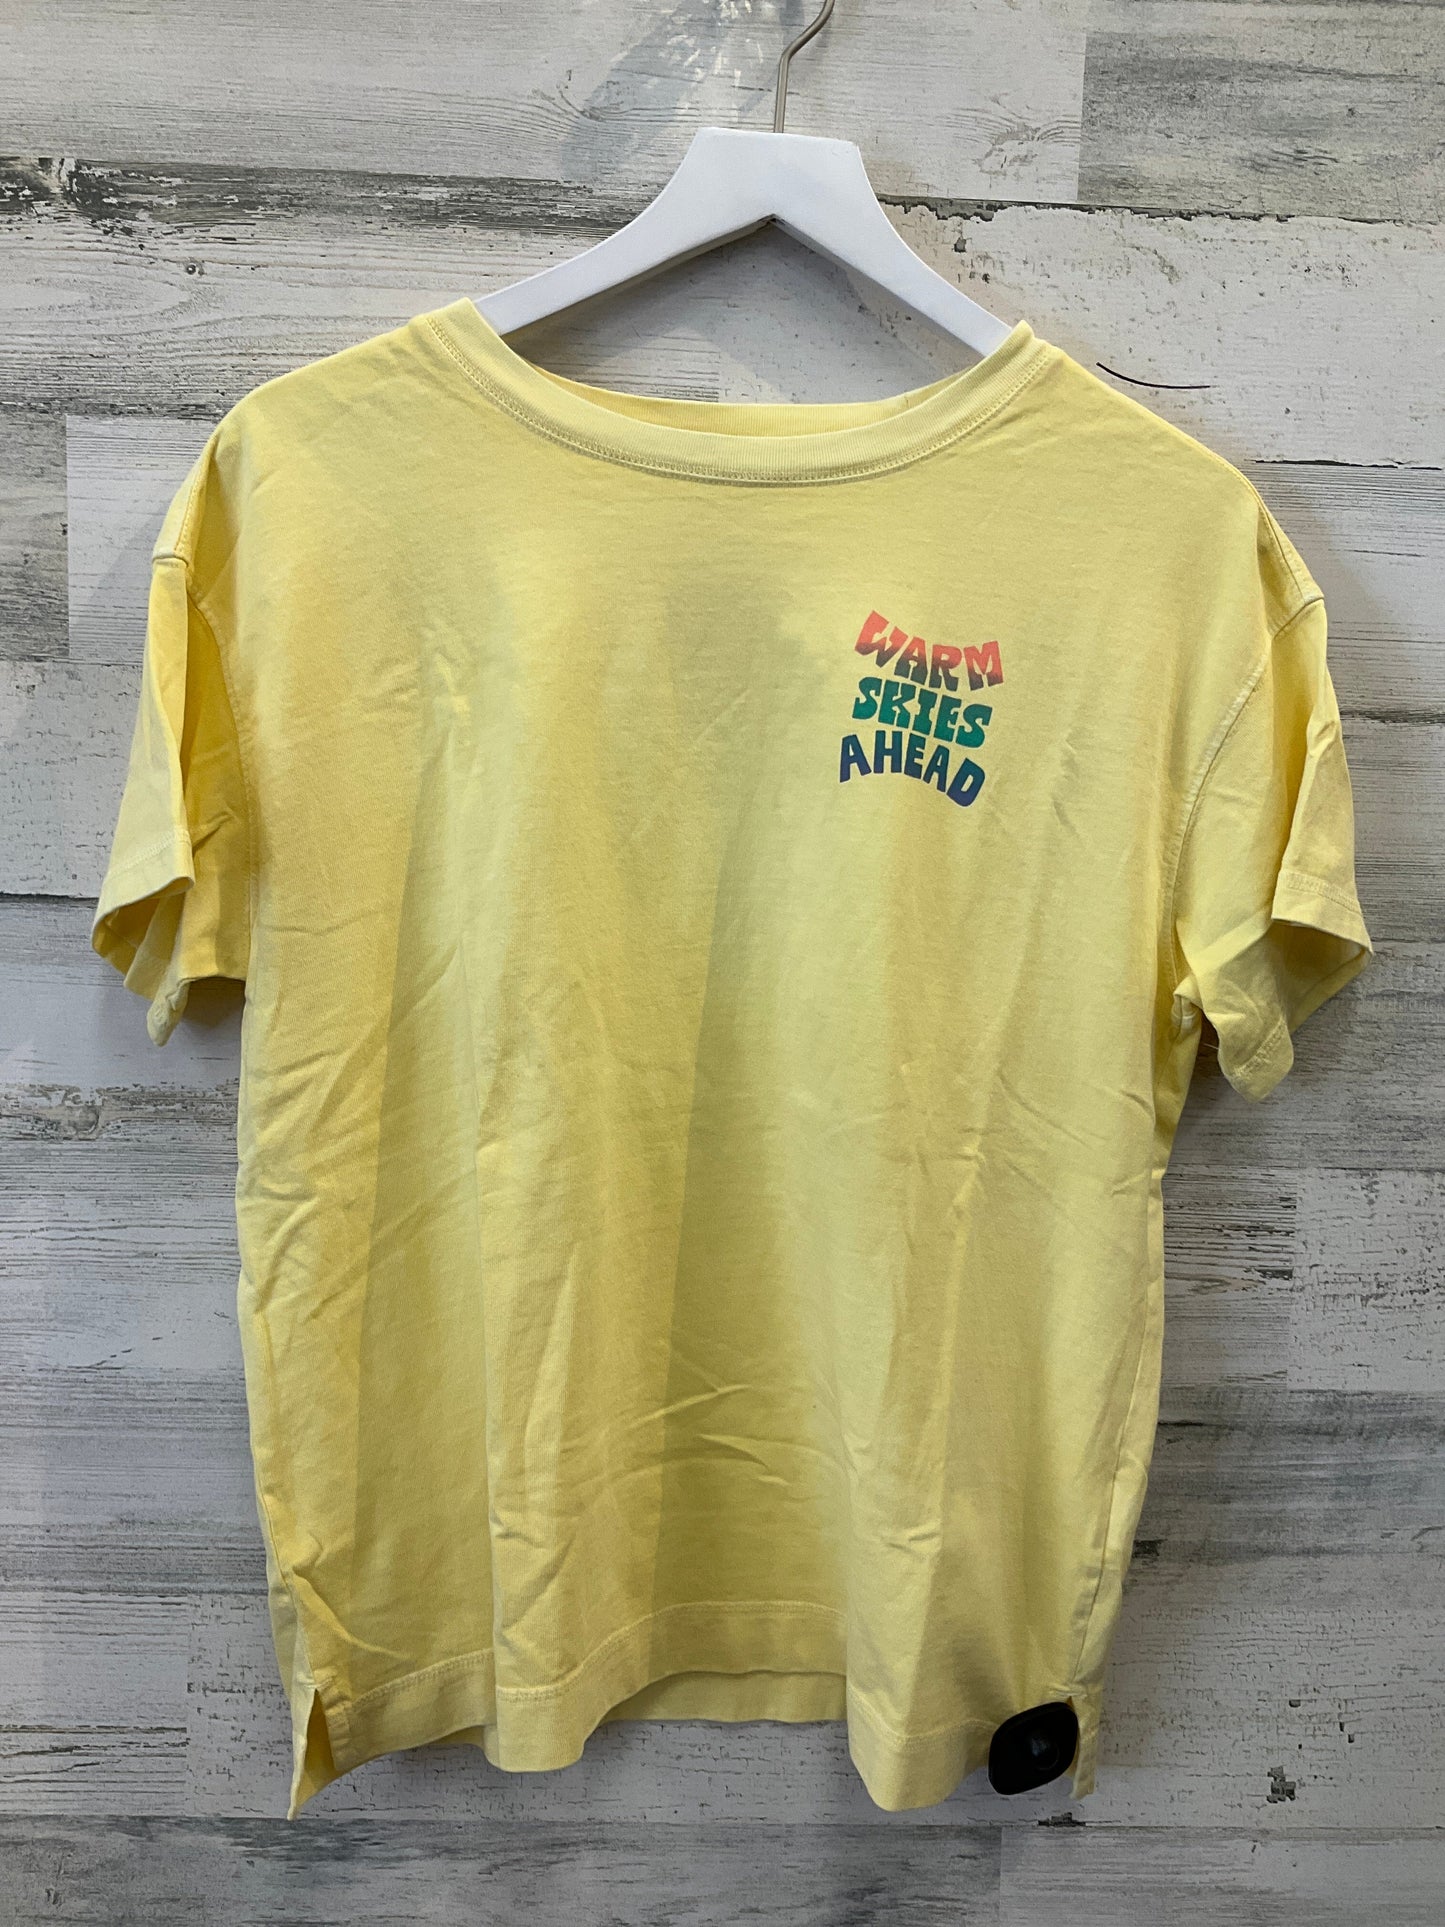 Yellow Top Short Sleeve Old Navy, Size S